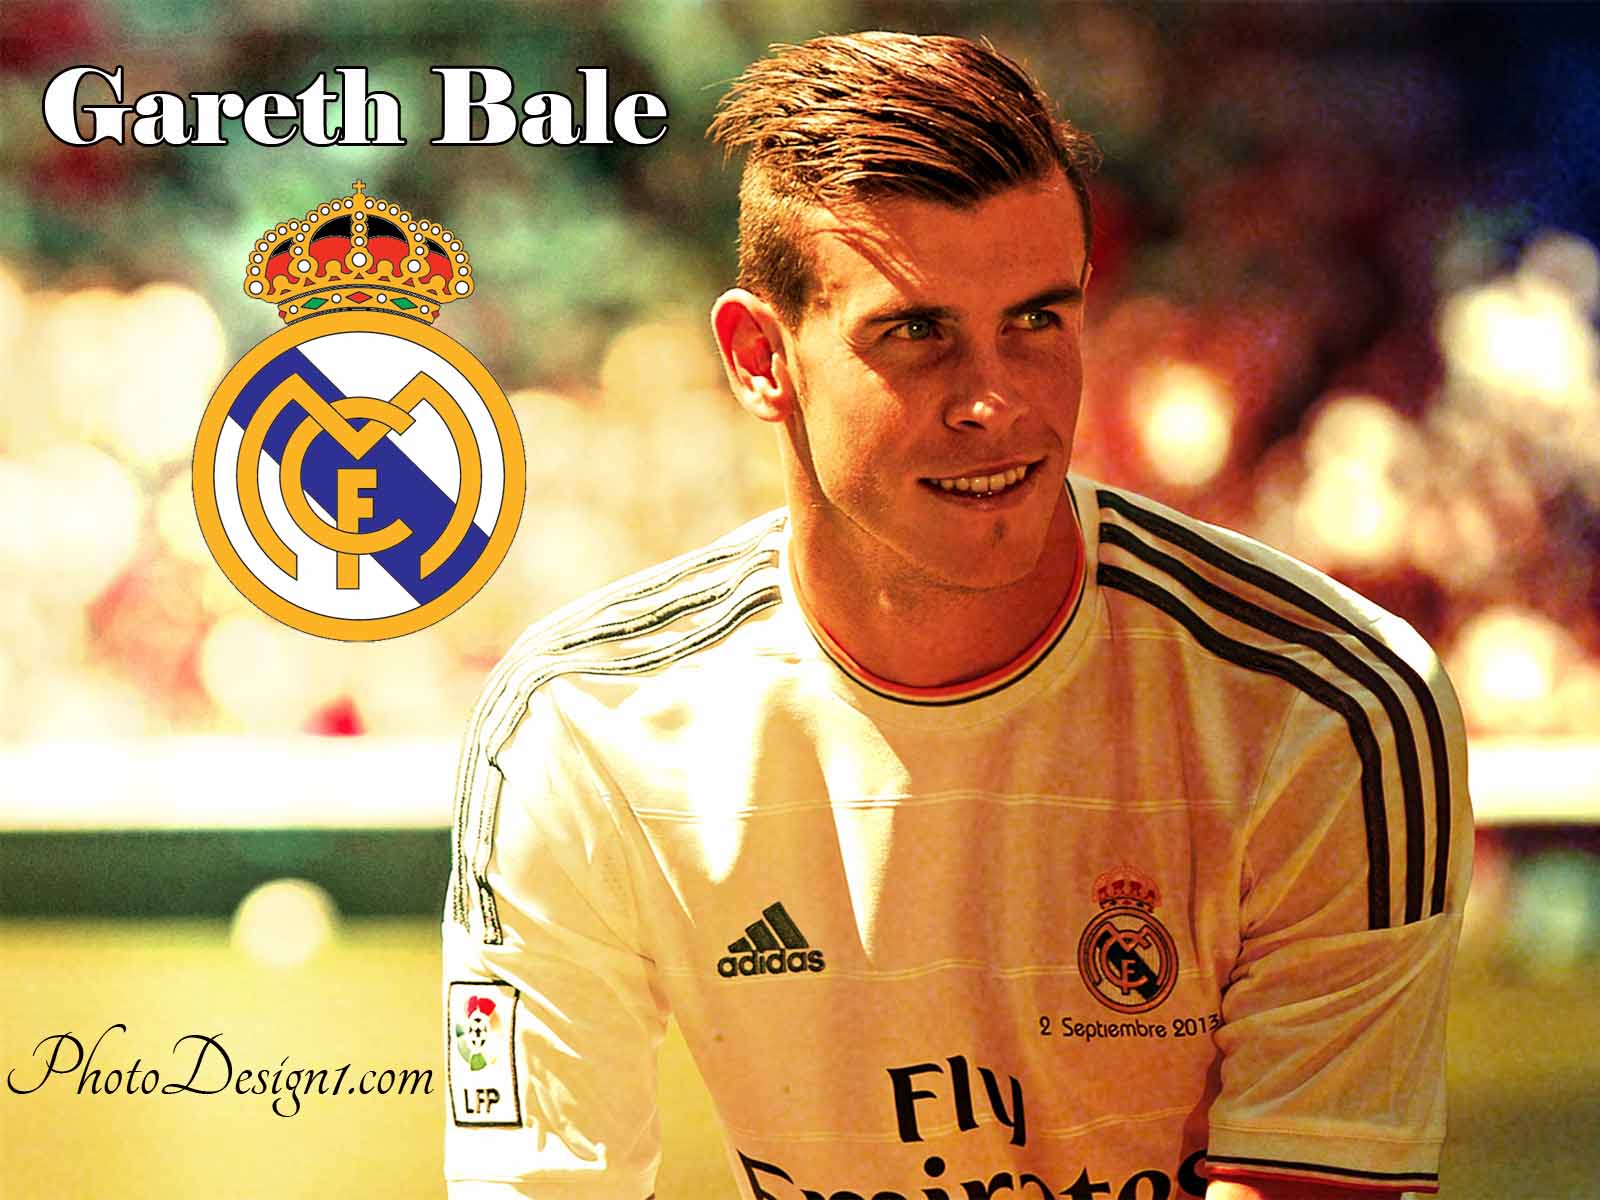 Download Gareth Bale Real Madrid HD Wallpaper Photo For